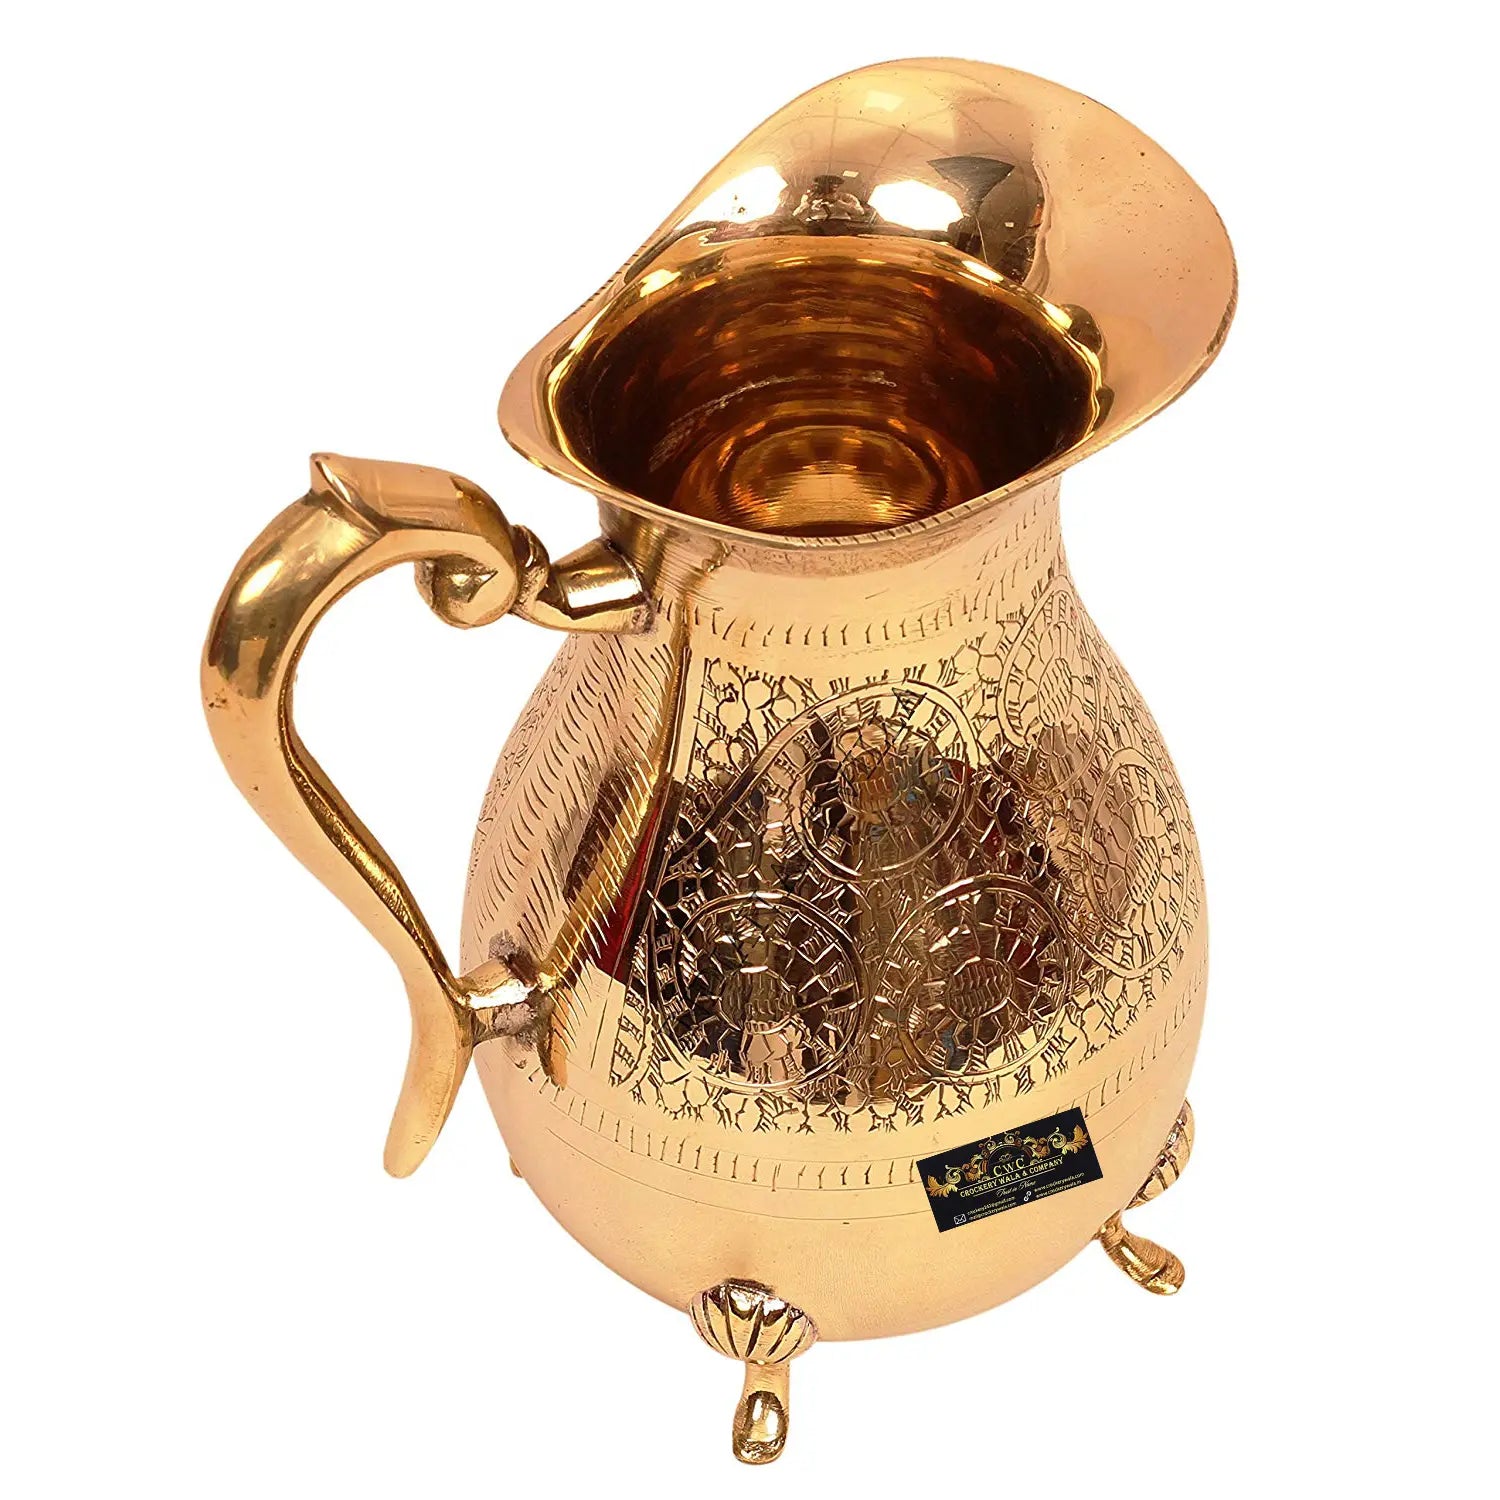 Pure Brass Handmade Jug Pitcher Jar with 4 Legs for Serving Drinking Water Home Decor - CROCKERY WALA AND COMPANY 